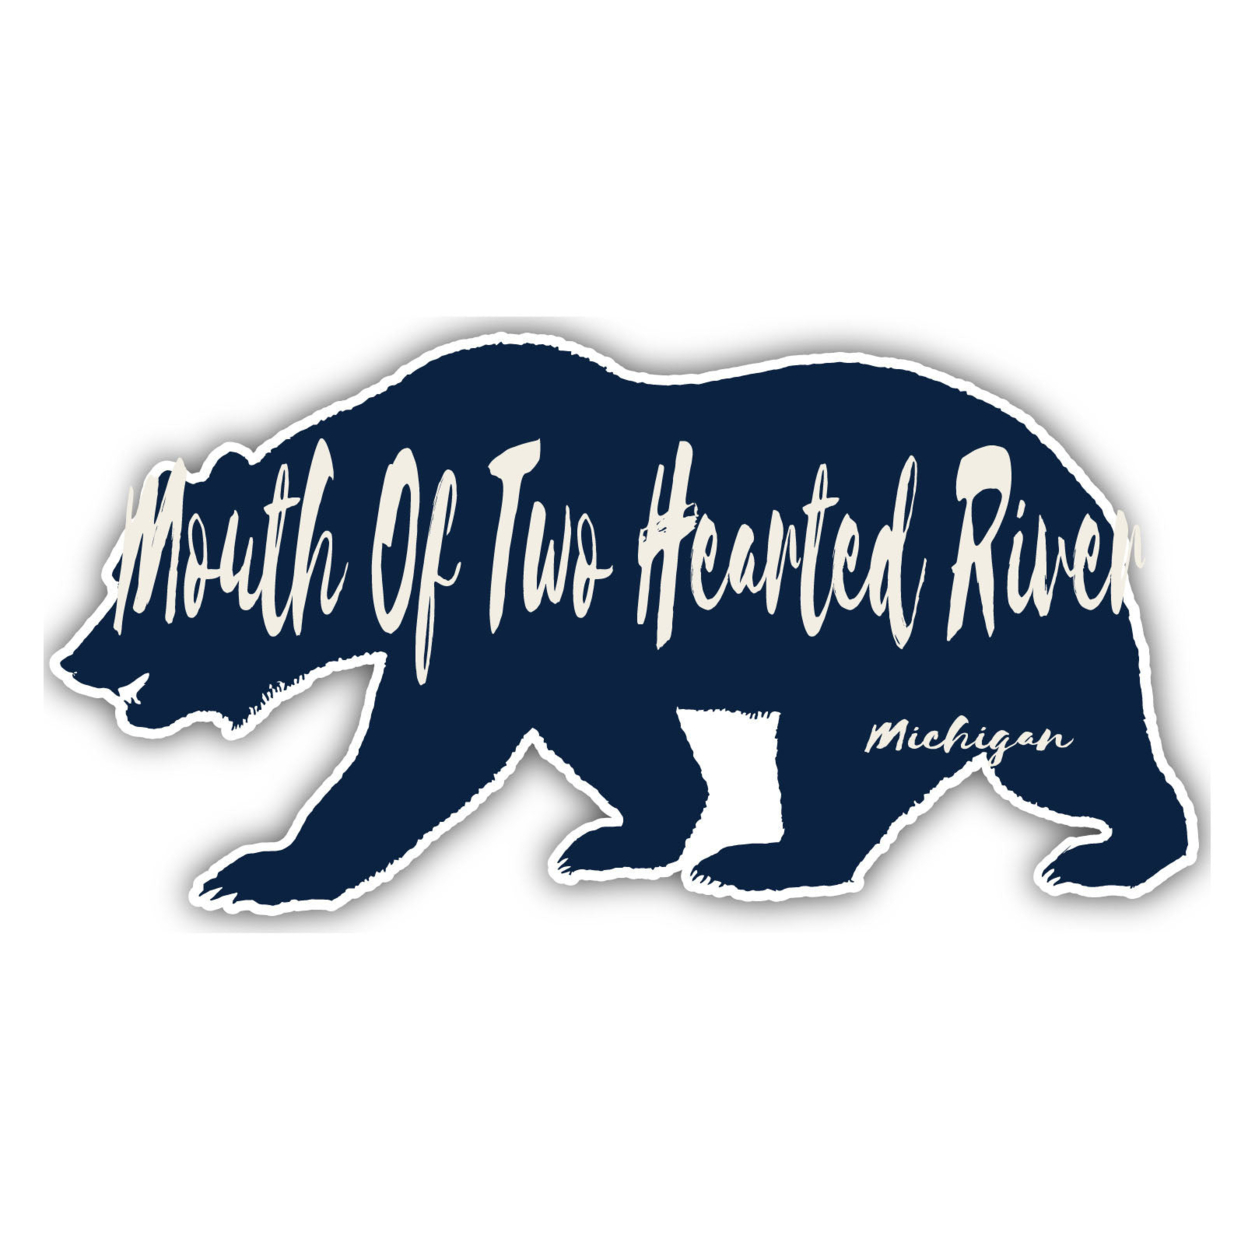 Mouth Of Two Hearted River Michigan Souvenir Decorative Stickers (Choose Theme And Size) - Single Unit, 4-Inch, Bear